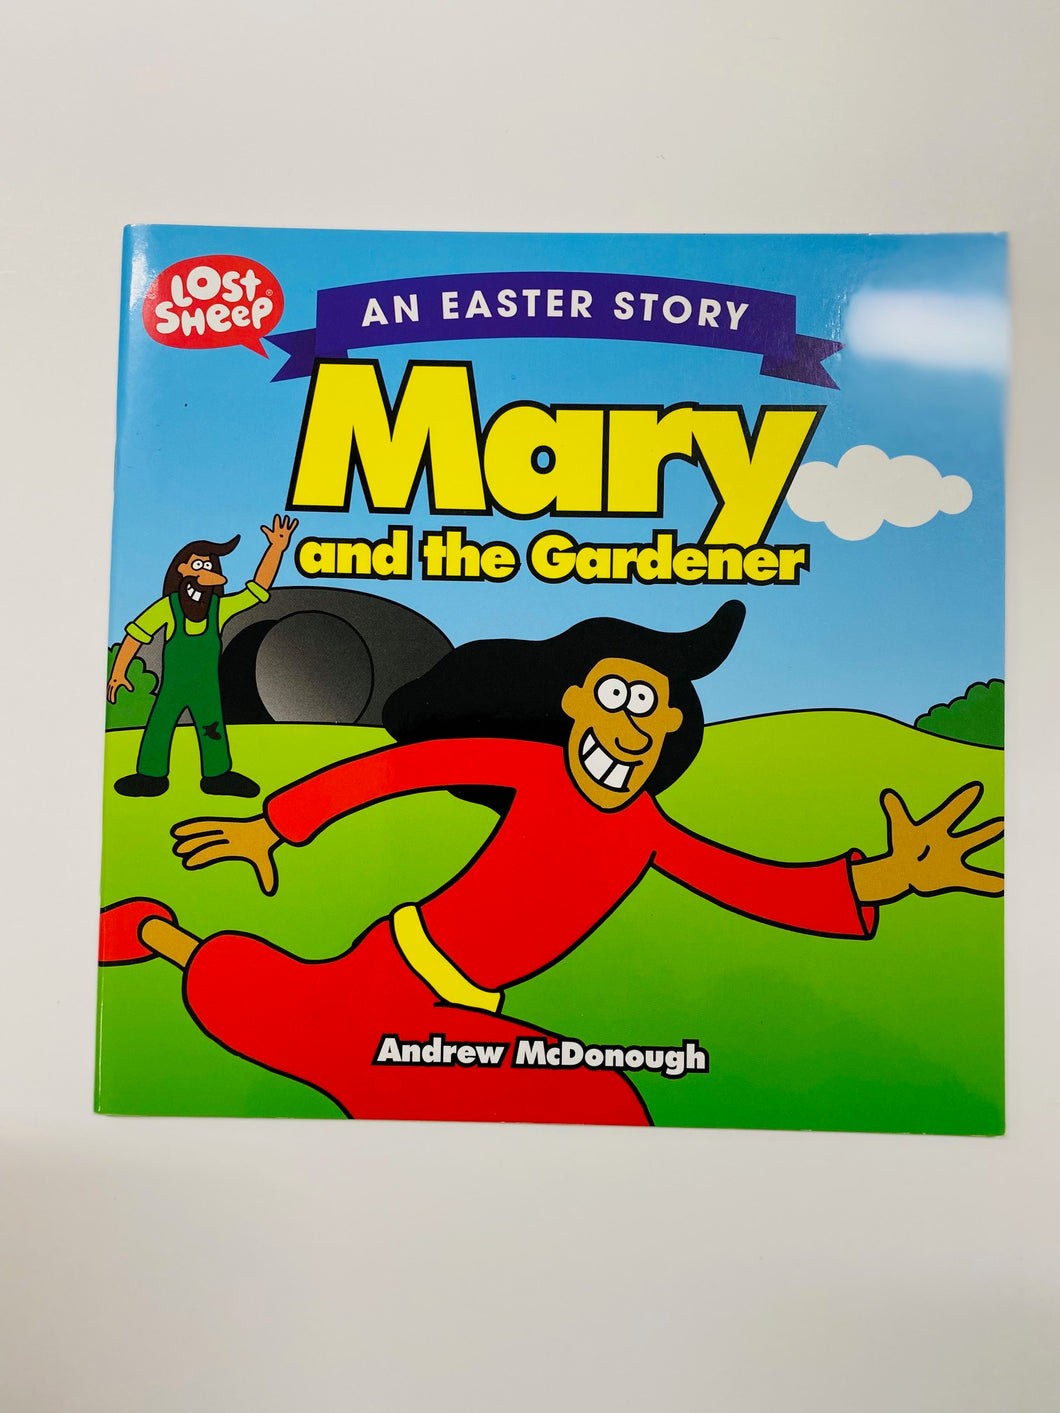 Lost Sheep: Mary and the Gardener